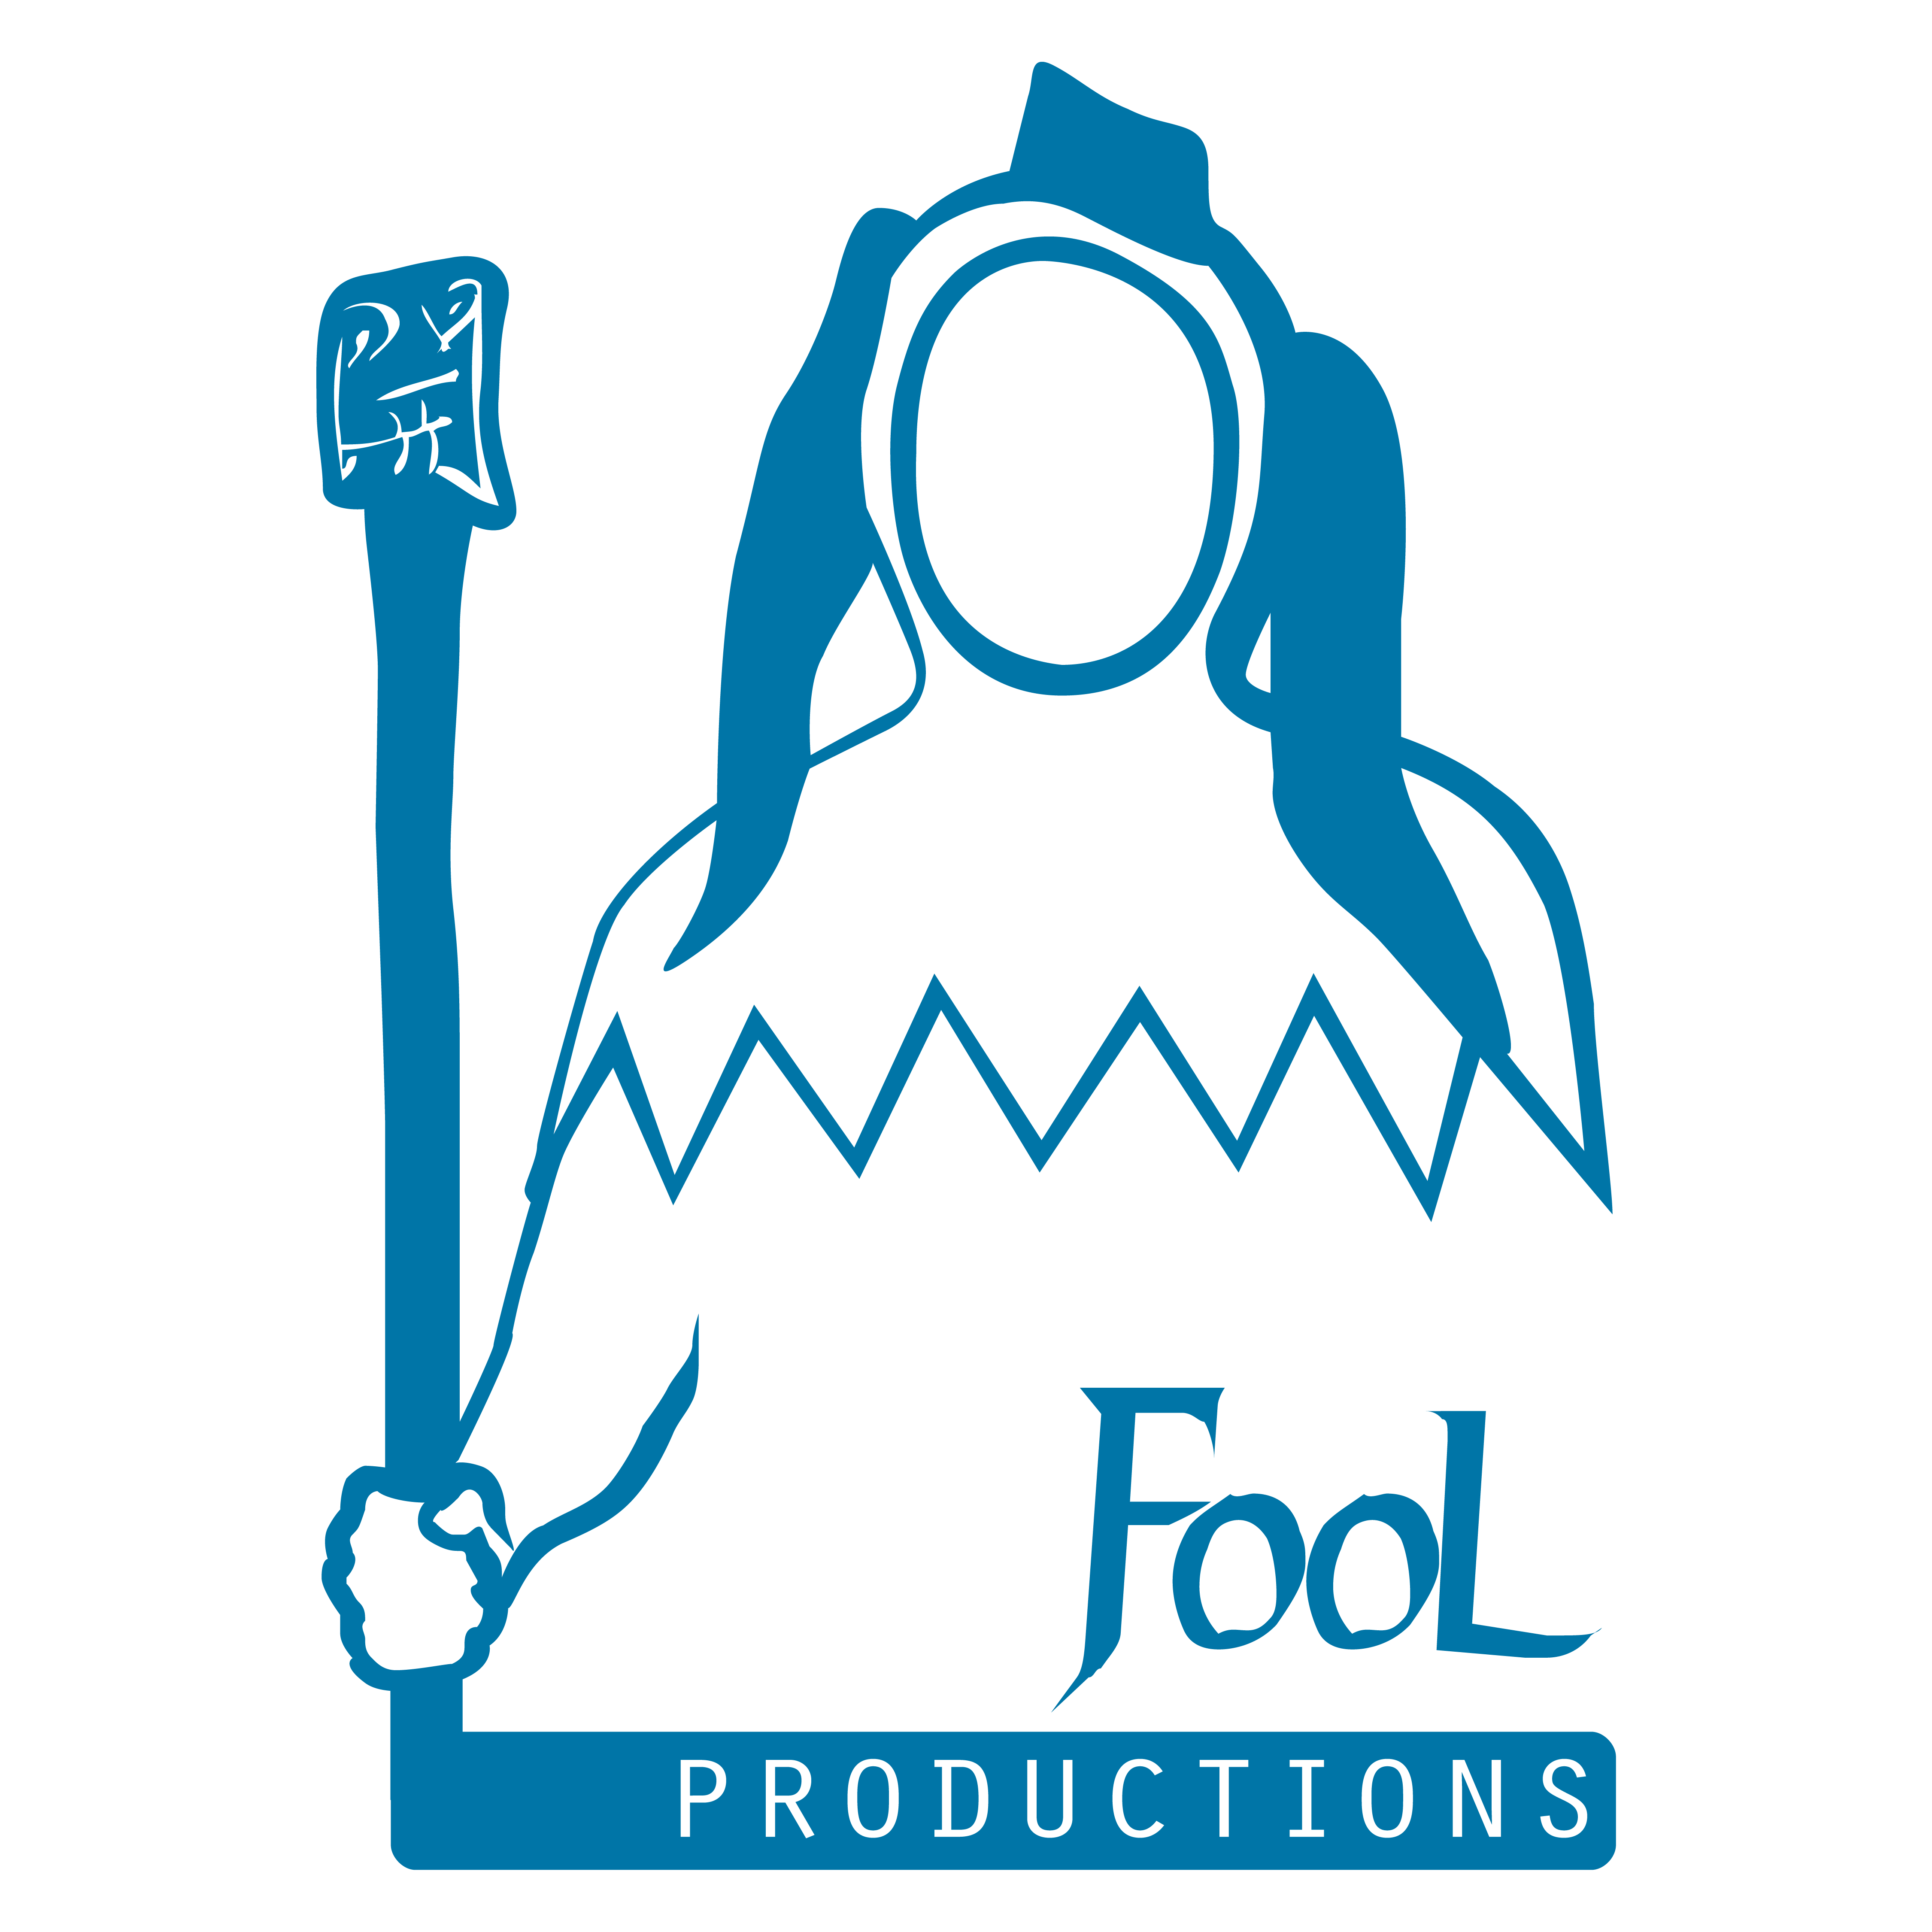 Foolproductions.nl